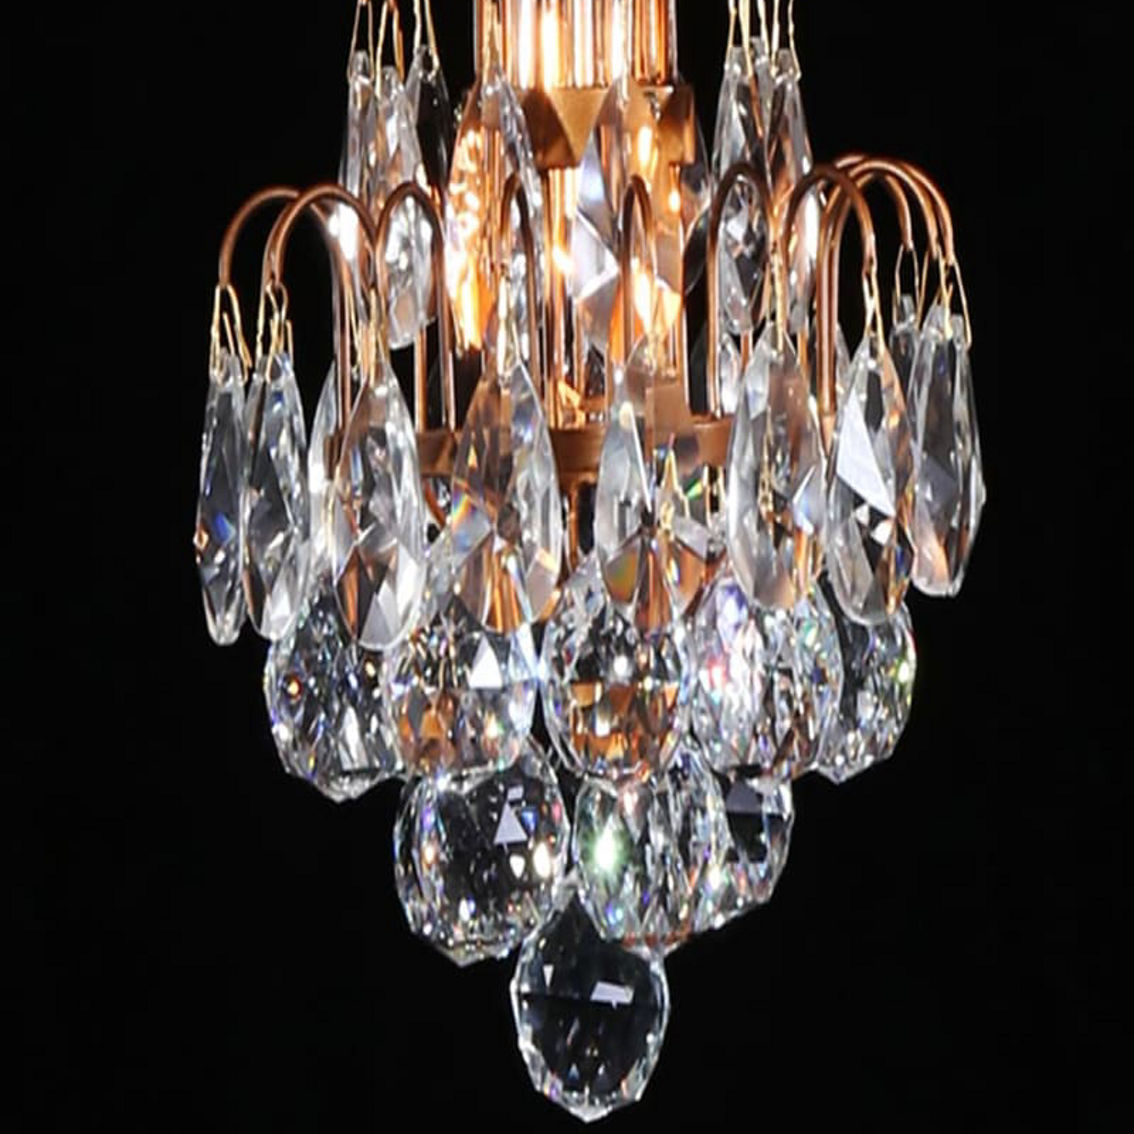 Manor Luxe, Bloom Contemporary Glass Crystal Chandelier w/ Edison Bulb Pendant - Image 2 of 2